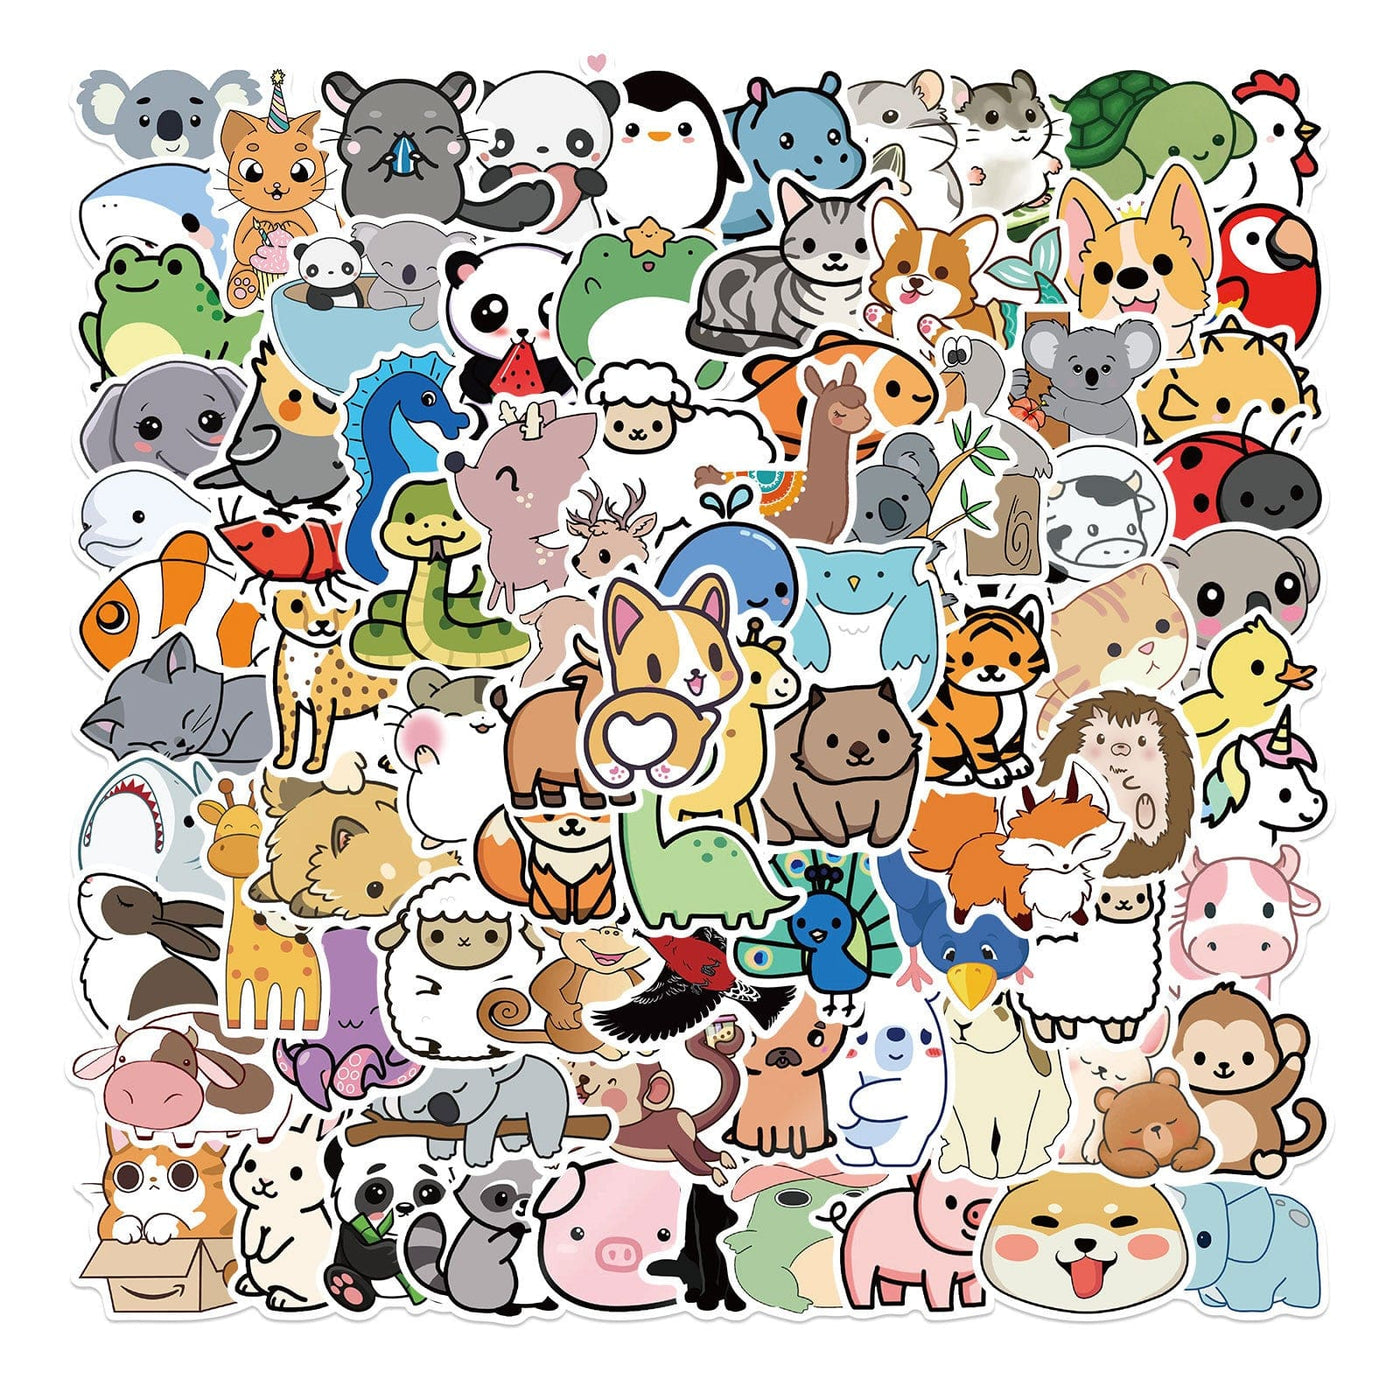 Cartoon Nature Animal Collection Decorated With Graffiti Stickers